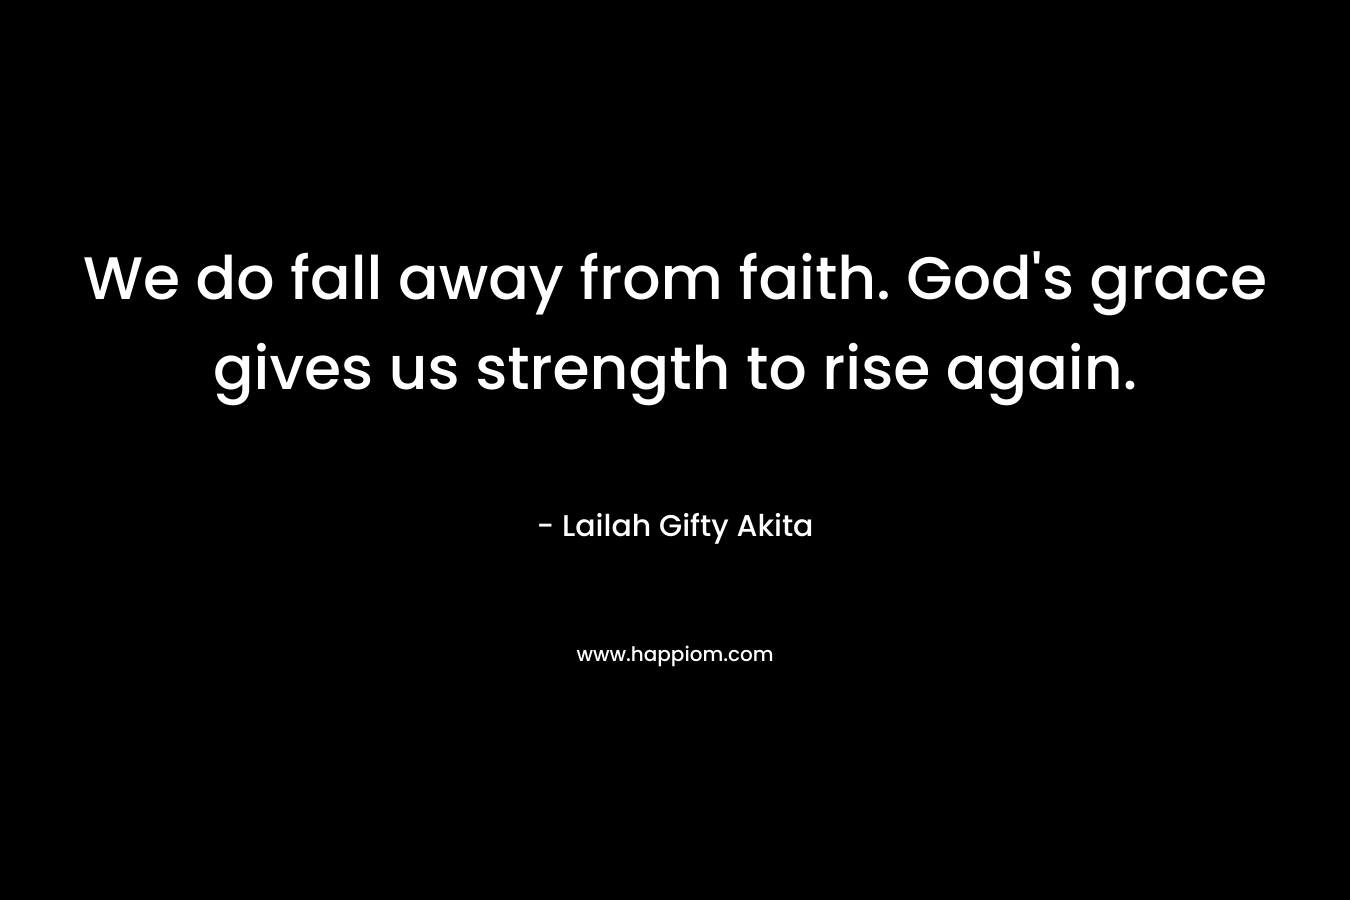 We do fall away from faith. God's grace gives us strength to rise again.